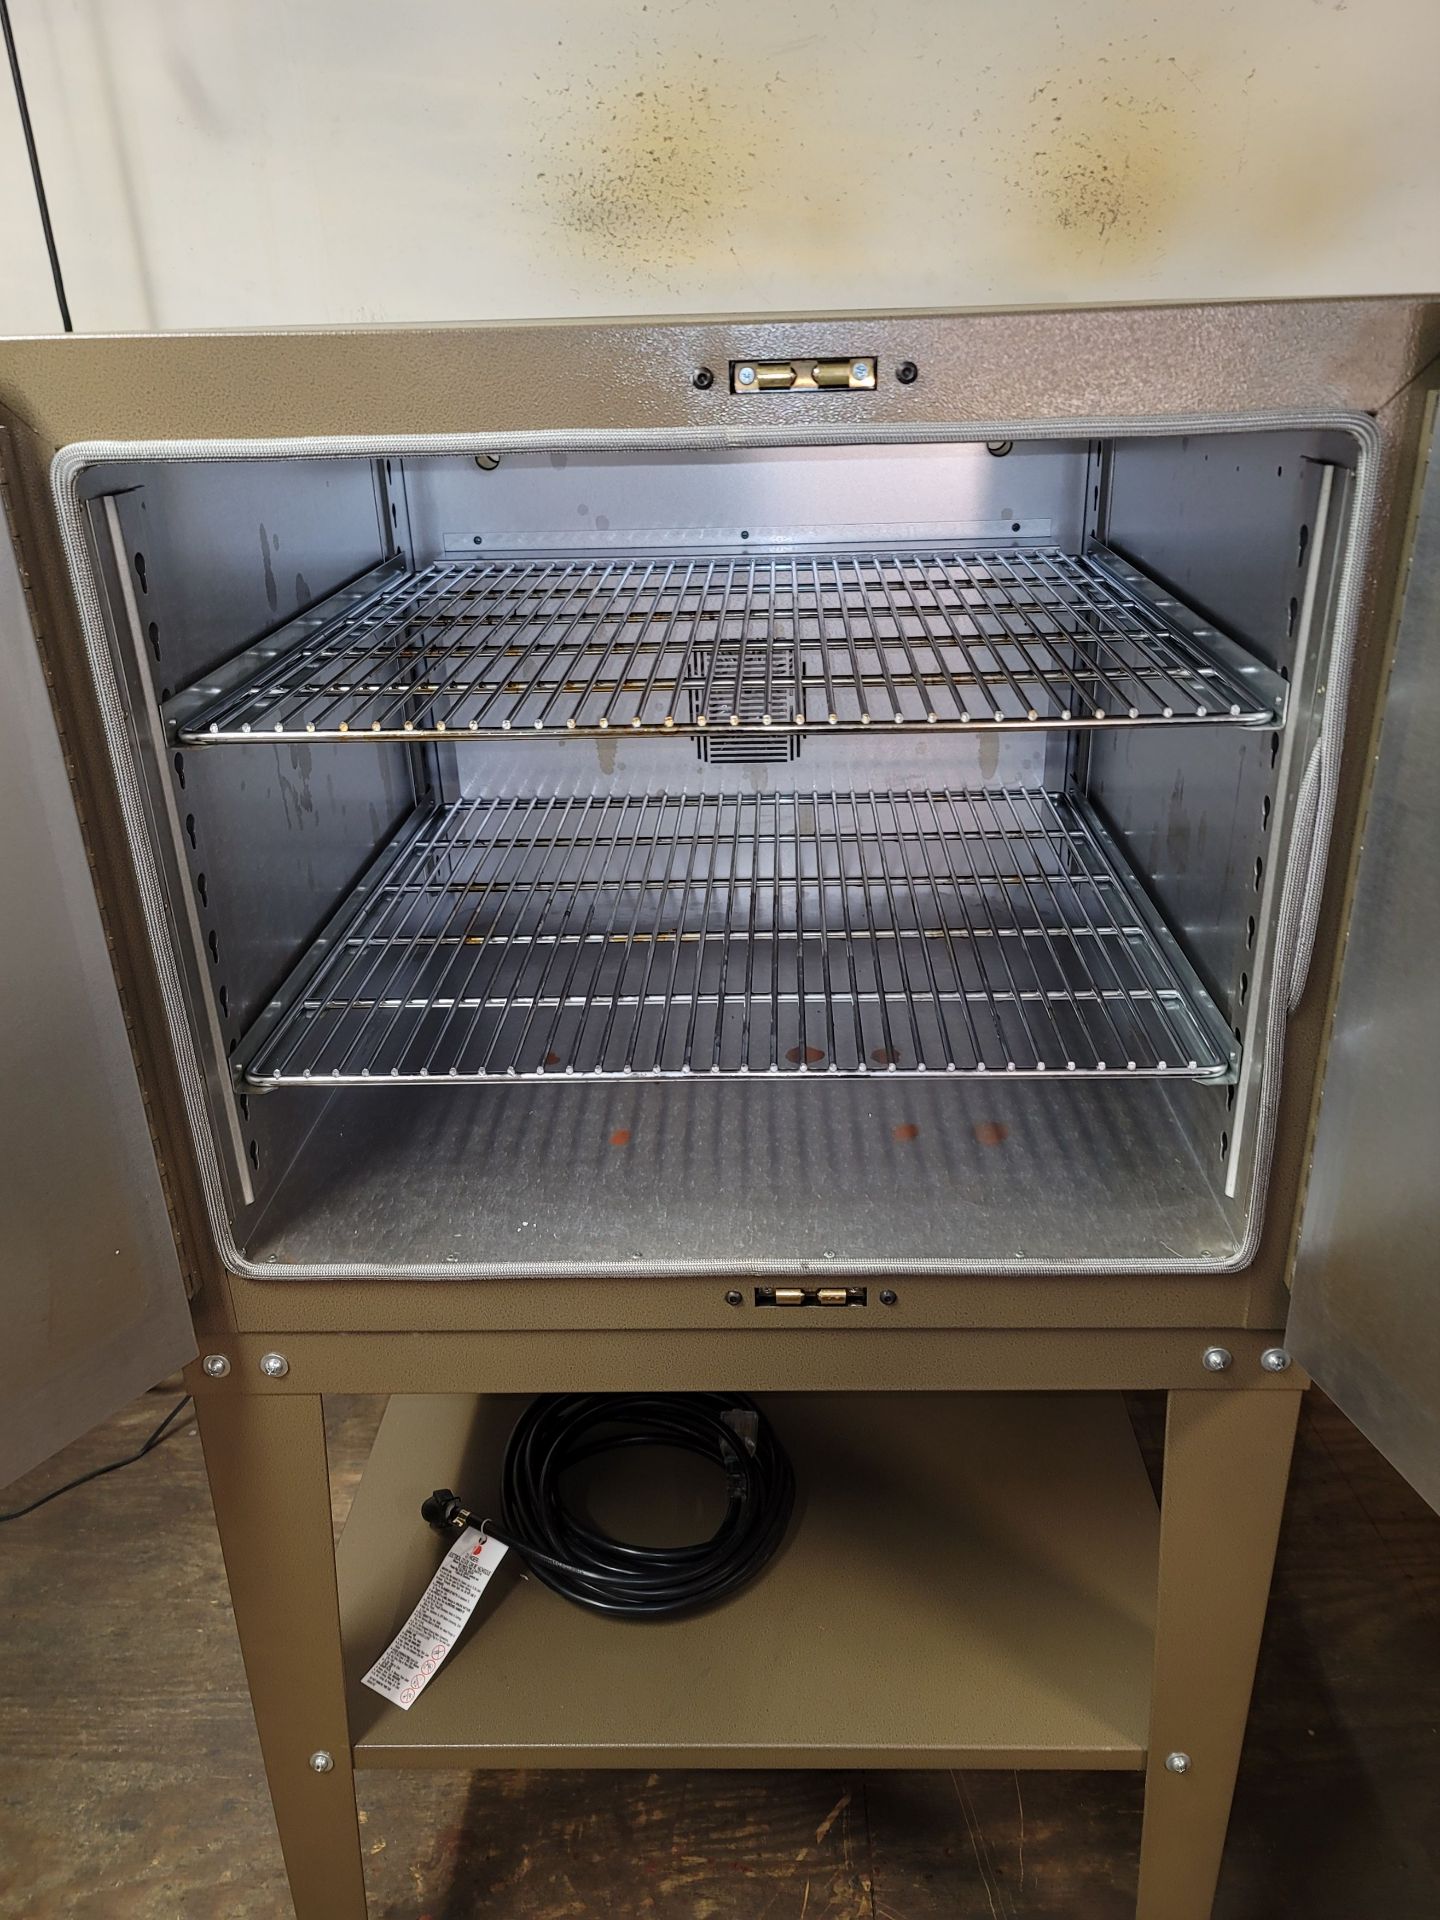 2021 QUINCY LAB 21-350 CONVECTION OVEN, S/N B23-06906 - Image 2 of 3